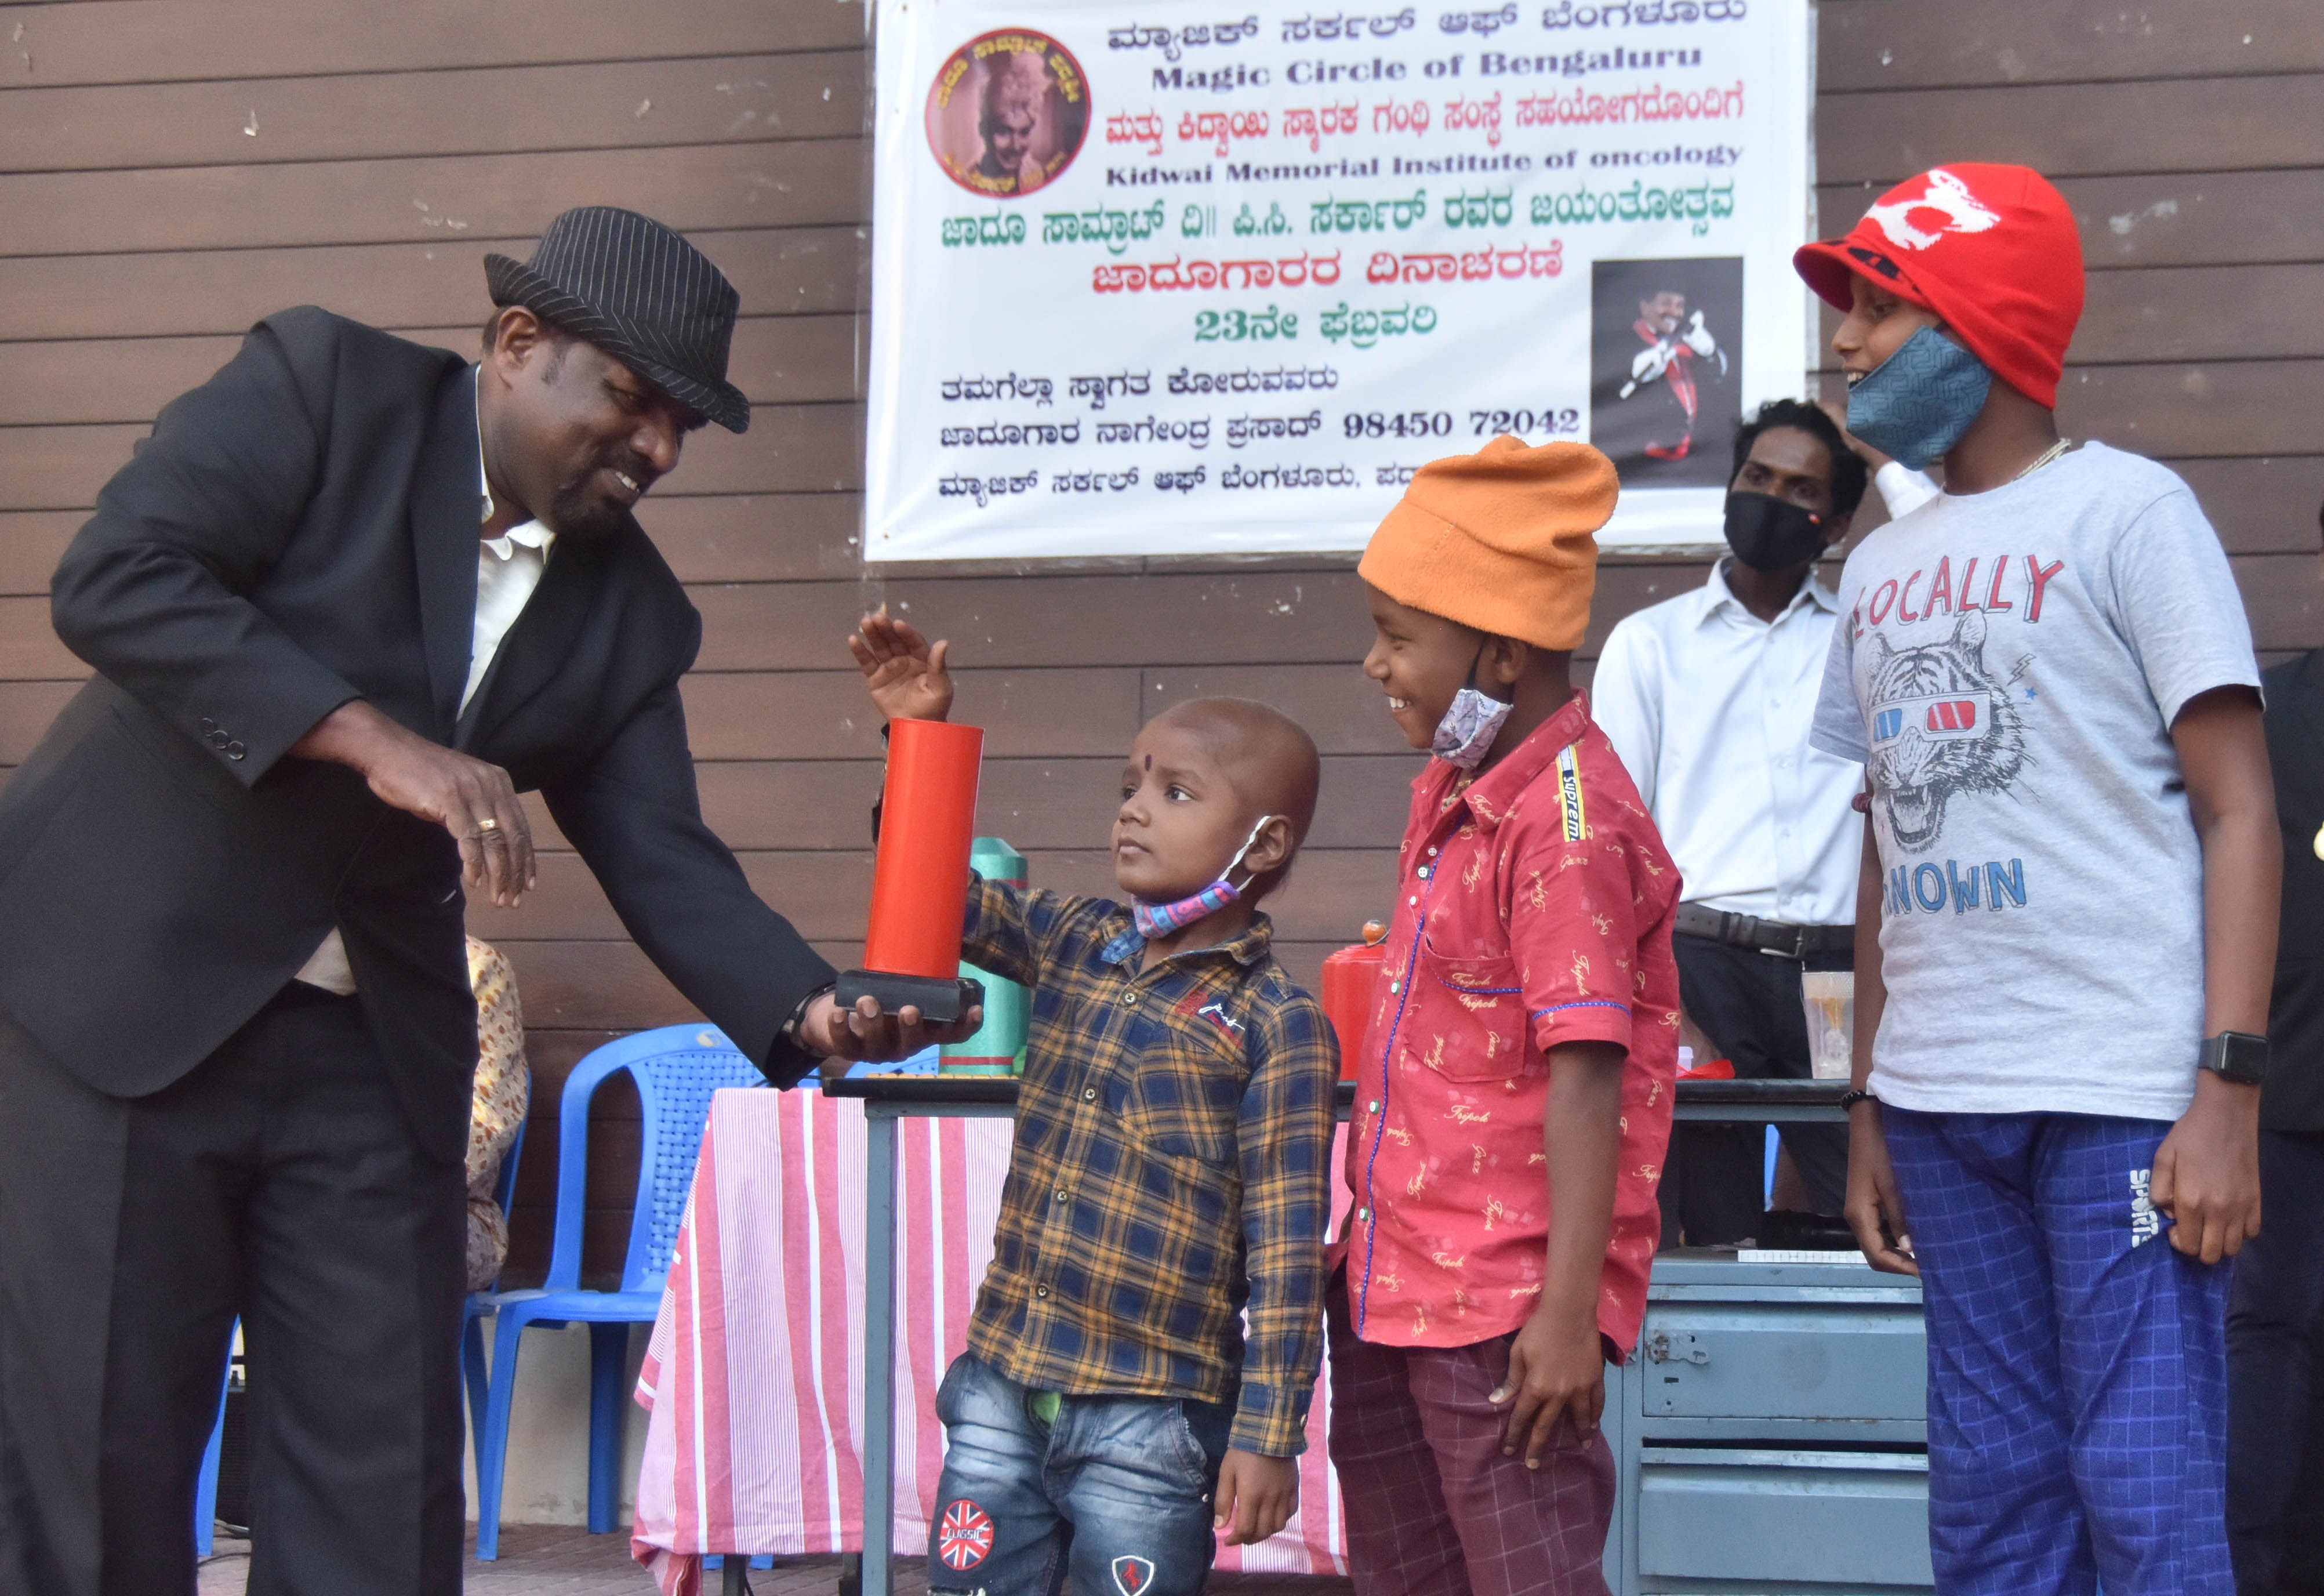 A magician performs for children during the 109th anniversary celebrations of Late P C Sorcar at Kidwai Memorial Cancer Institute. Credit: DH Photo/Janardhan B K